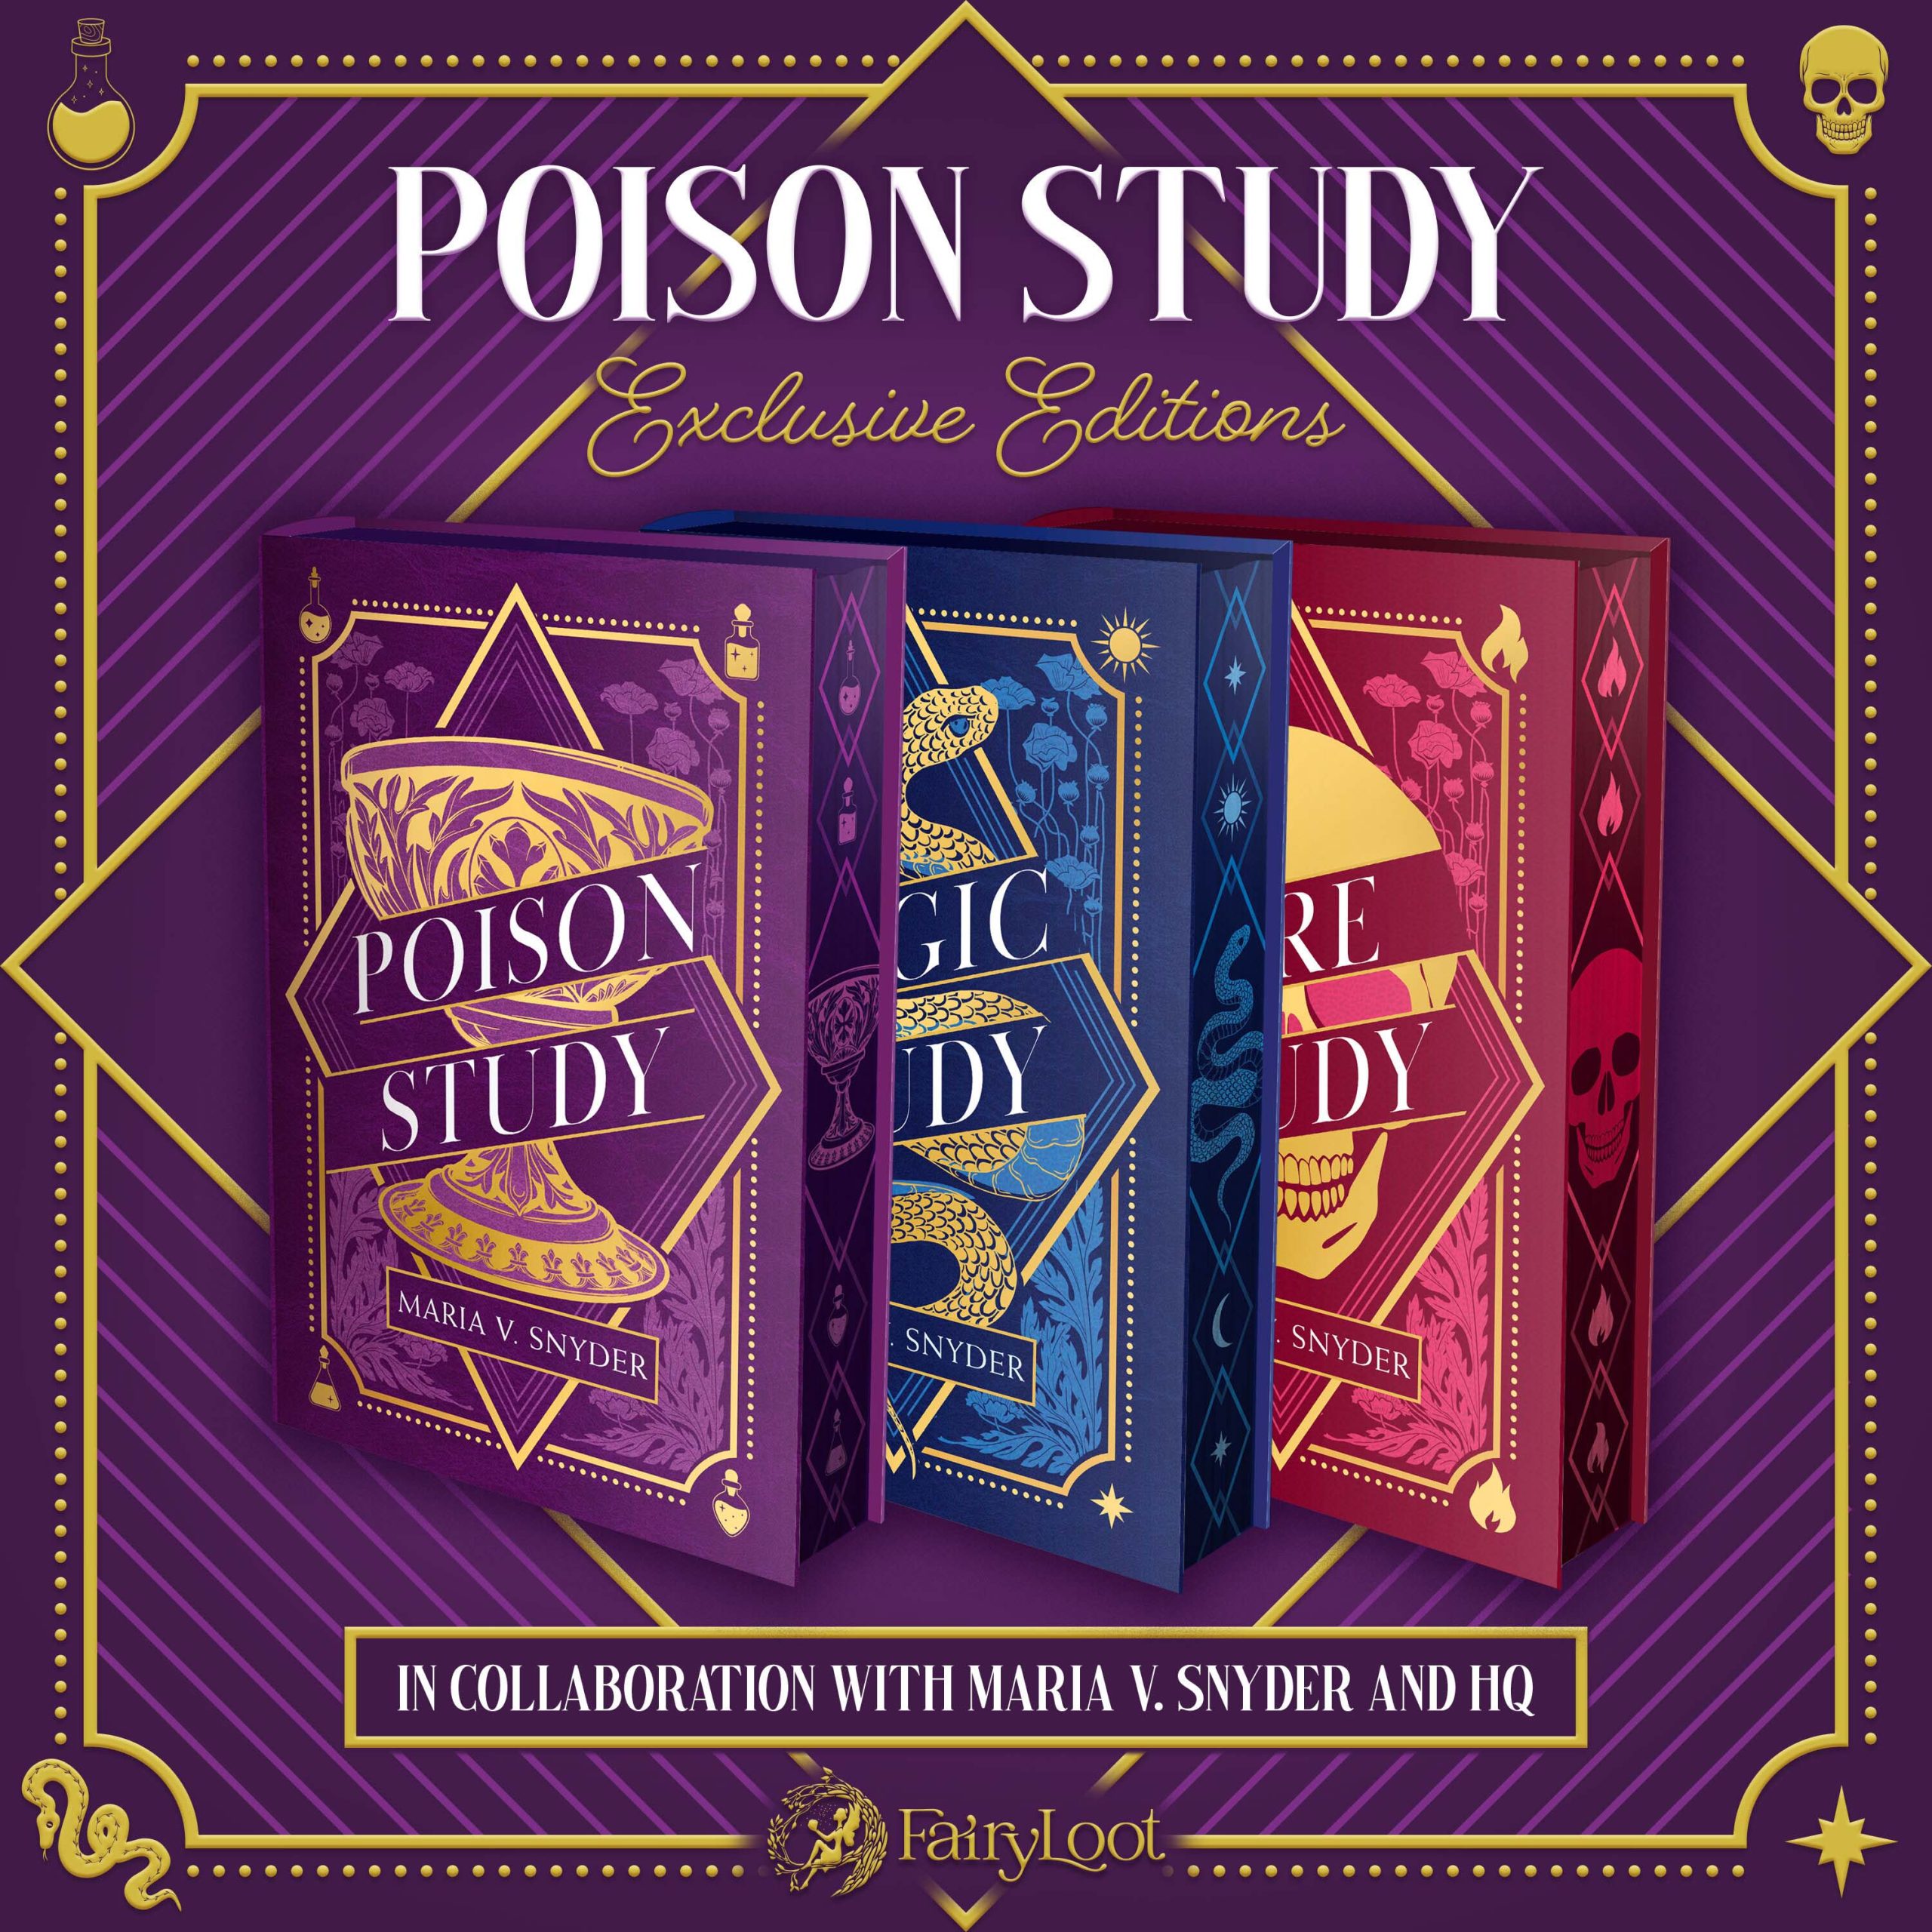 The Poison Study Exclusive Editions